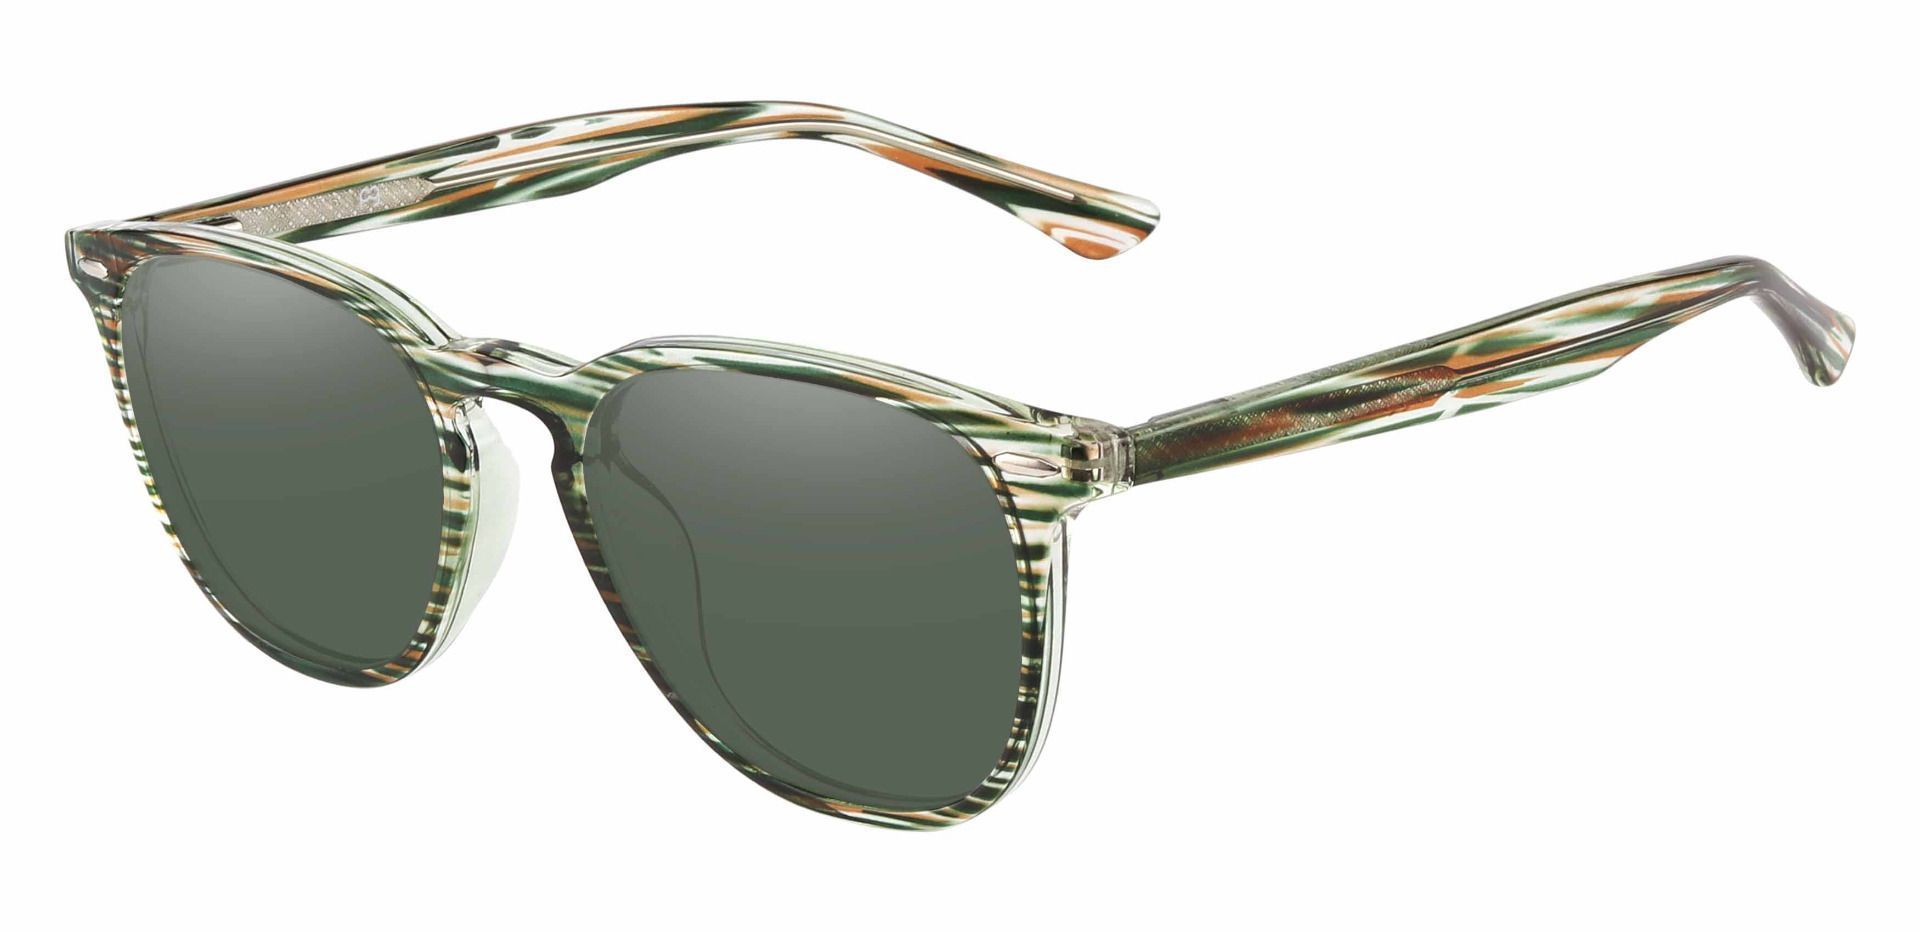 Sycamore Oval Reading Sunglasses - Green Frame With Green Lenses